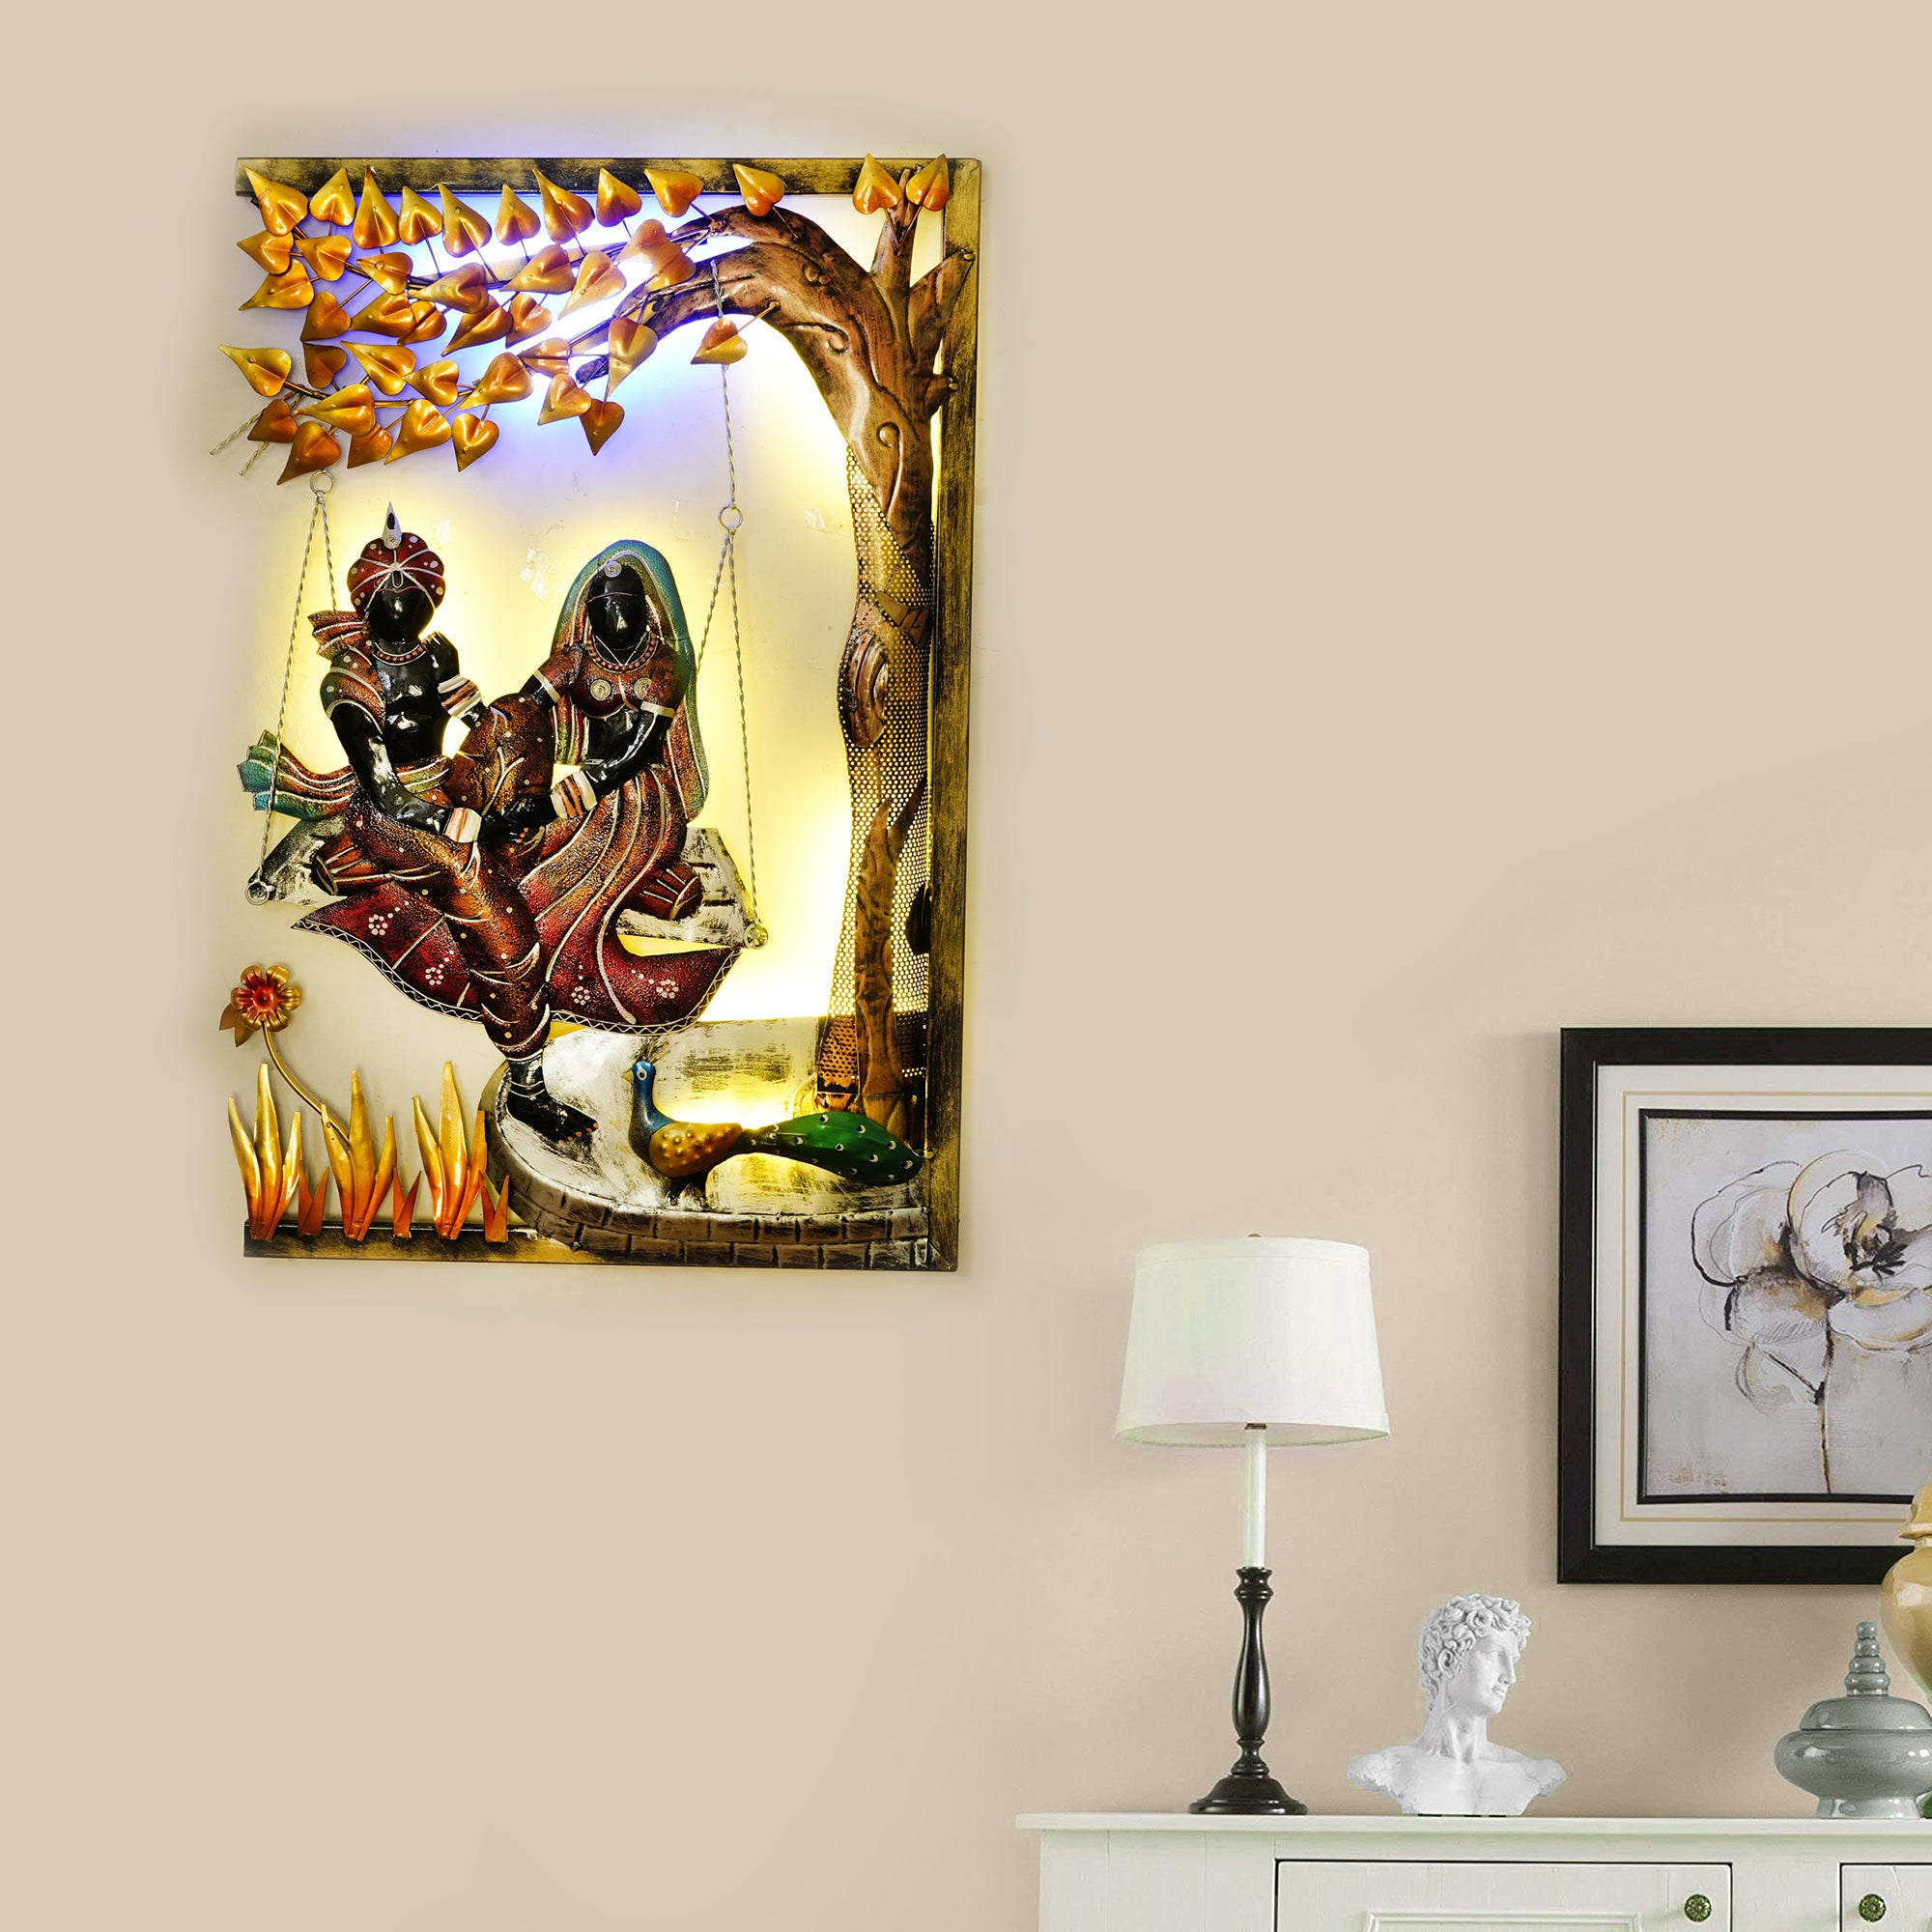 Radha Krishna on Swing Under Tree Handcrafted Metal Wall Hanging with Background LED's